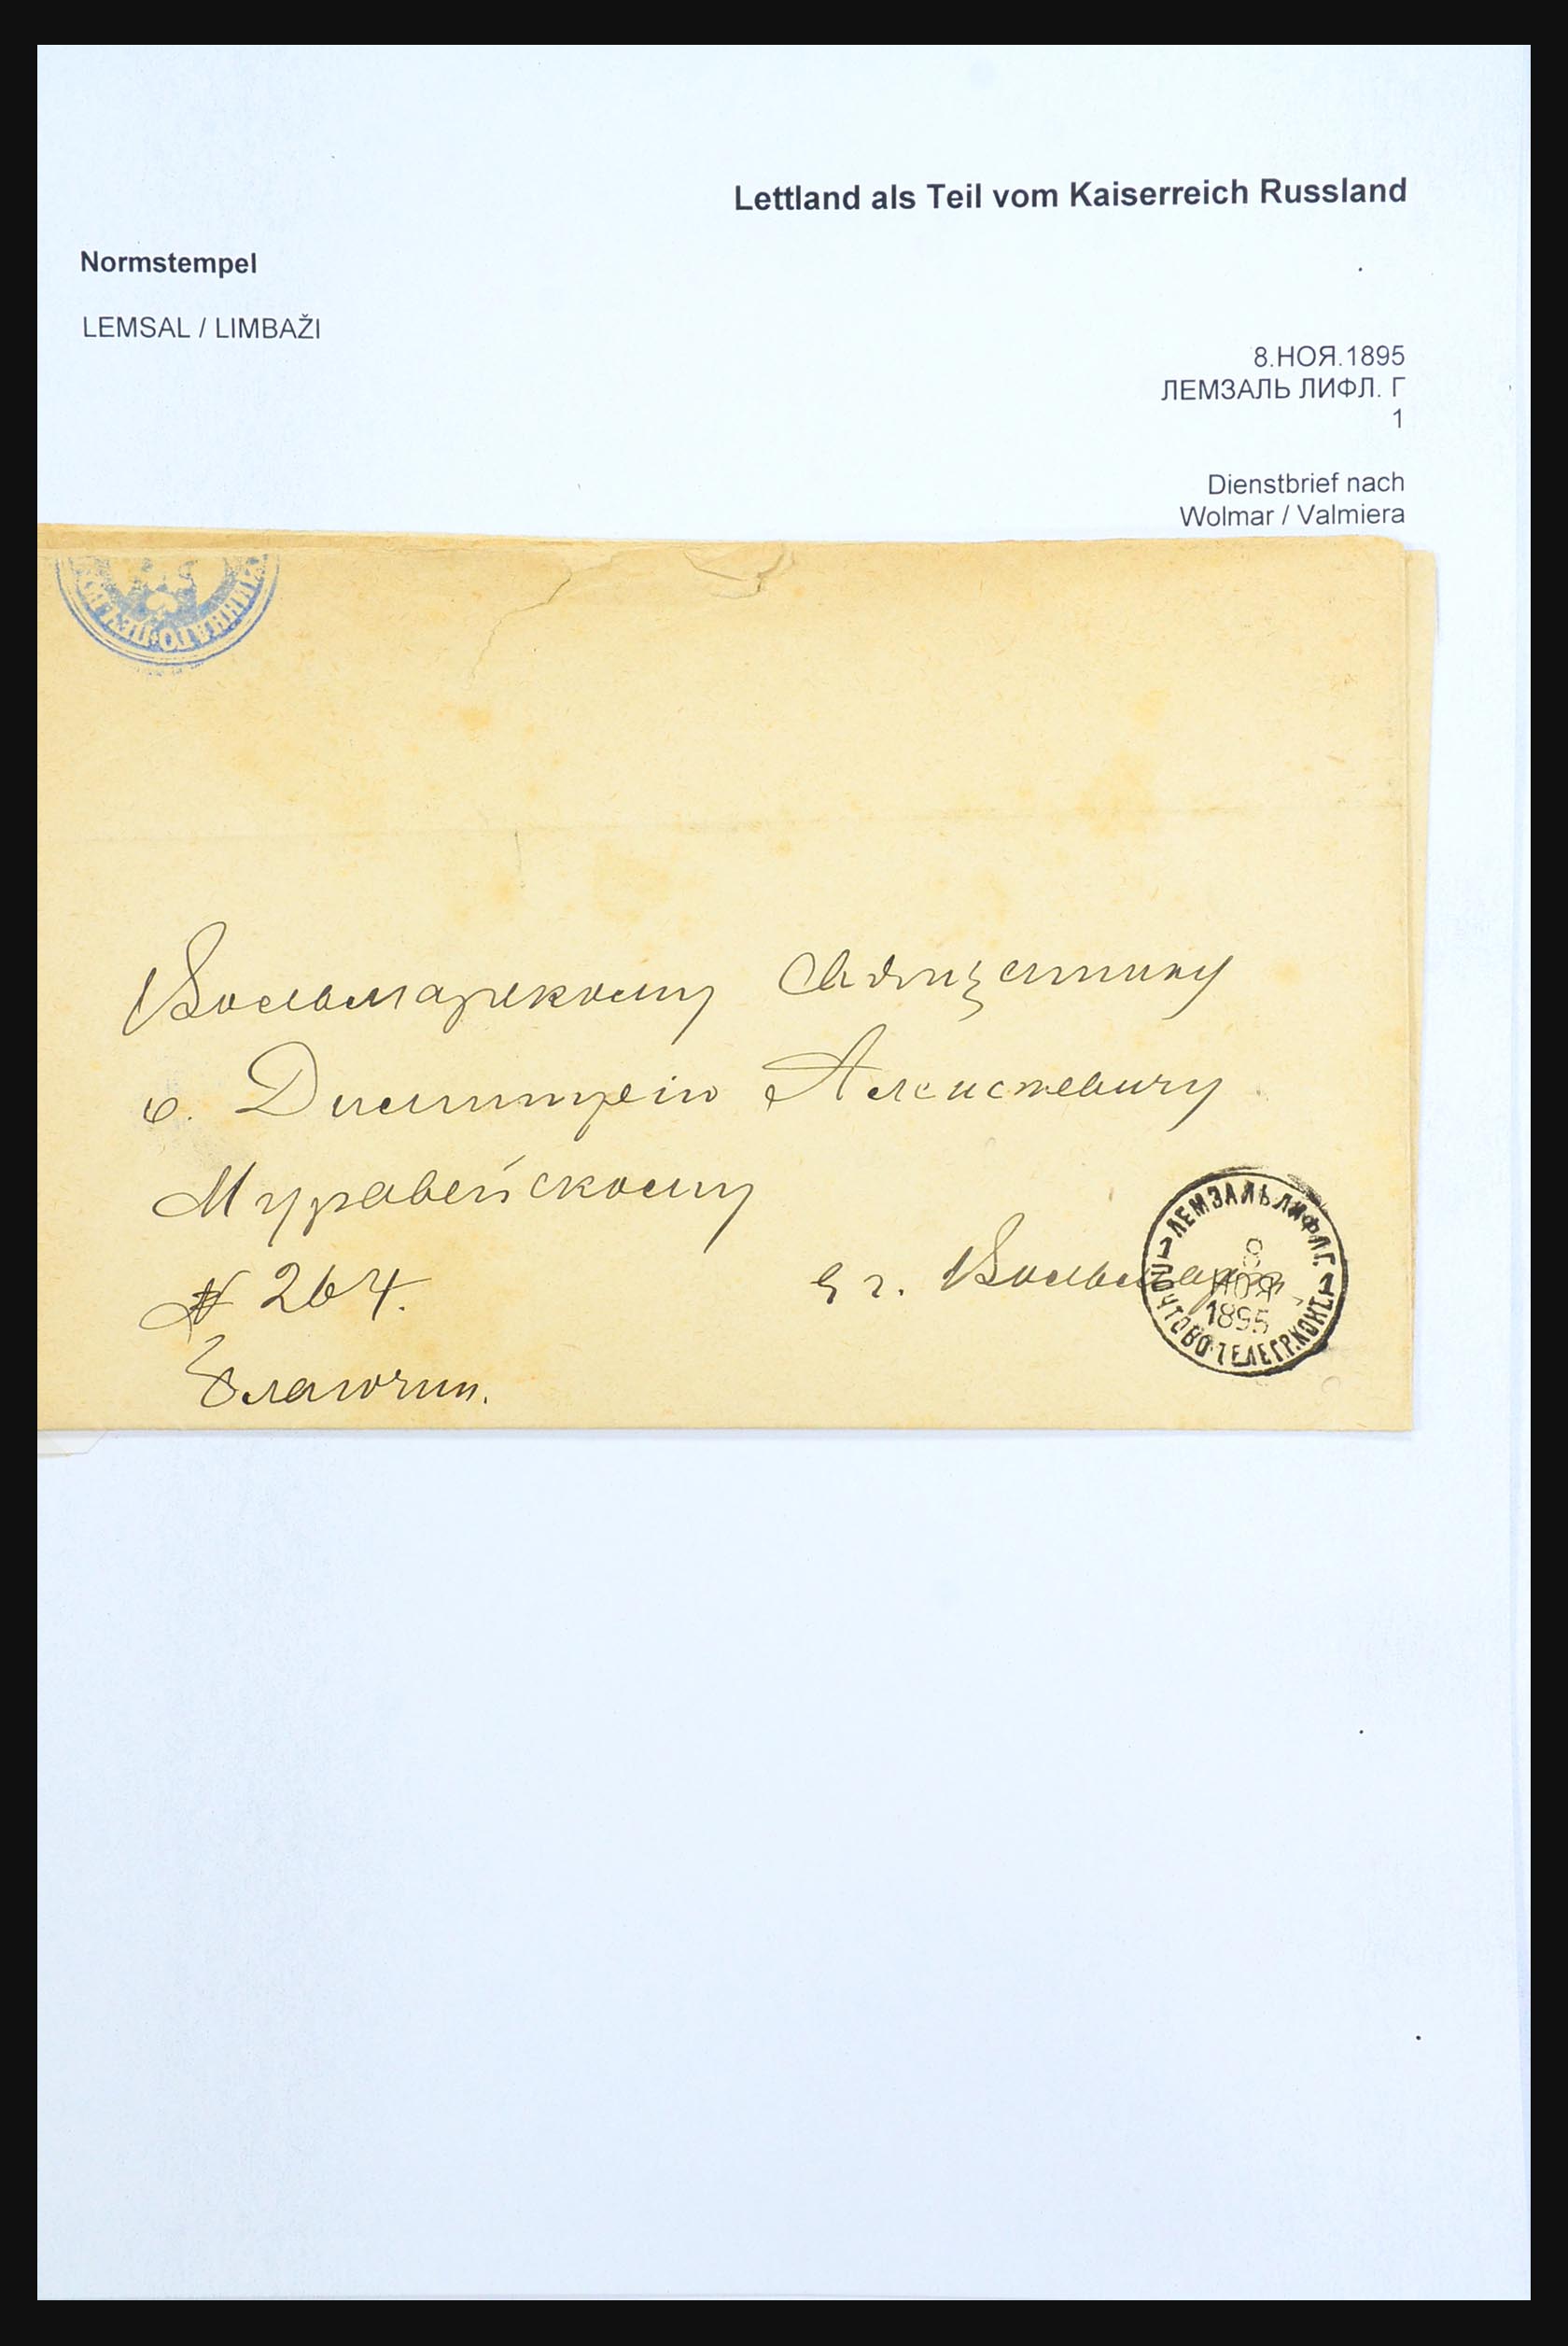 31305 073 - 31305 Latvia as part of Russia 1817-1918.